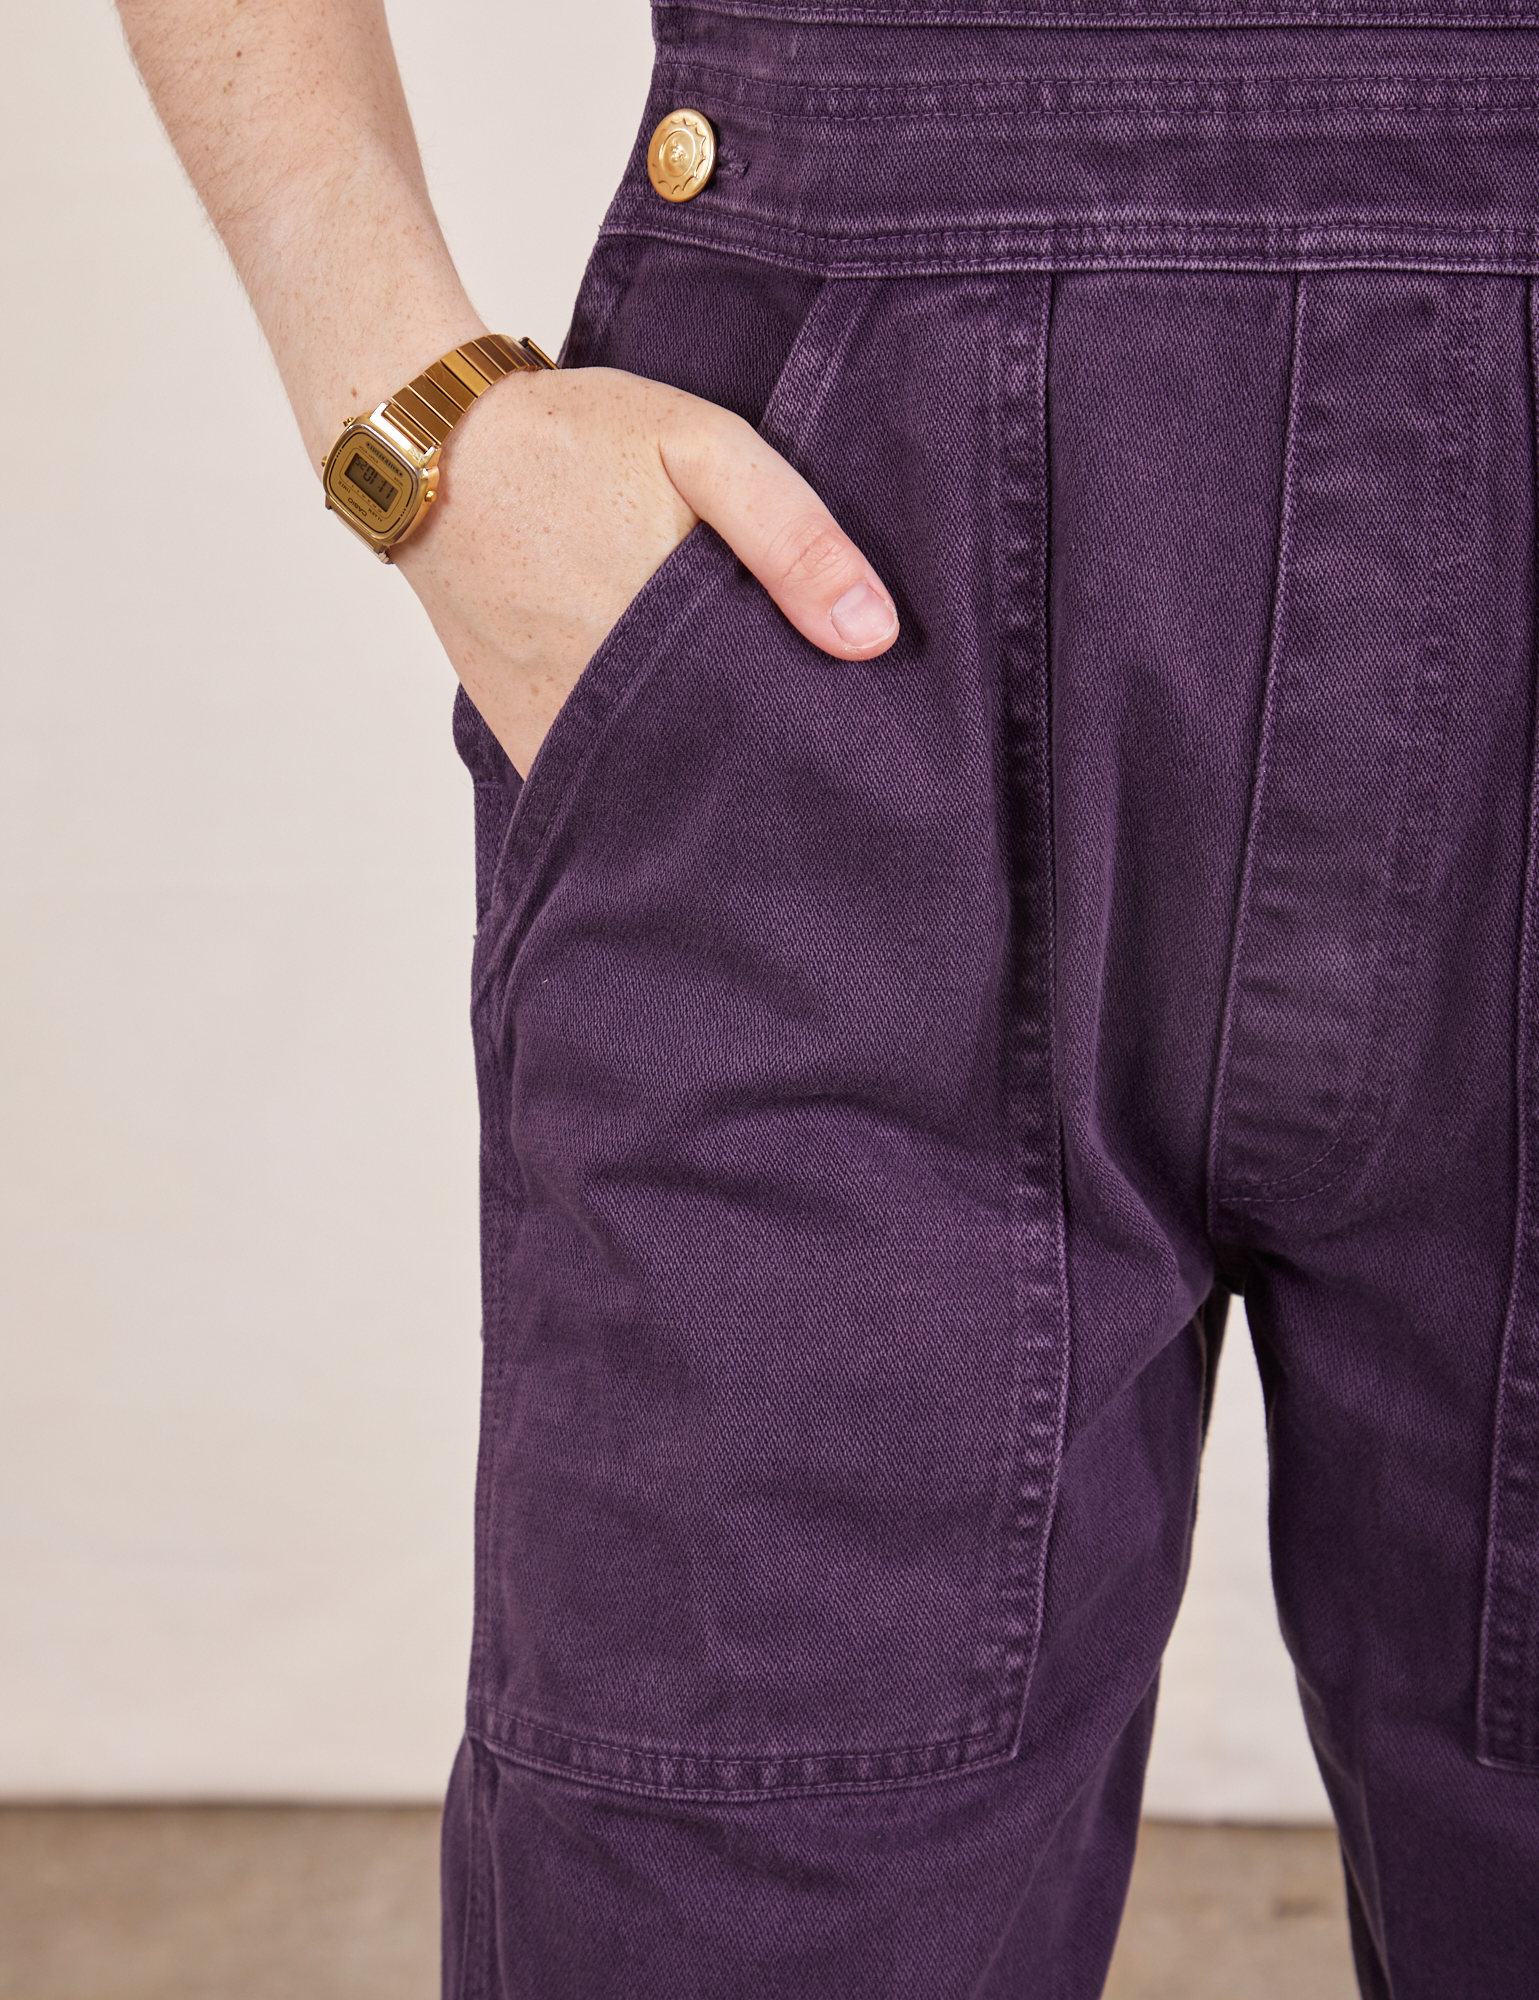 Front pocket close up of Original Overalls in Mono Nebula Purple. Hana has her hand in the pocket.